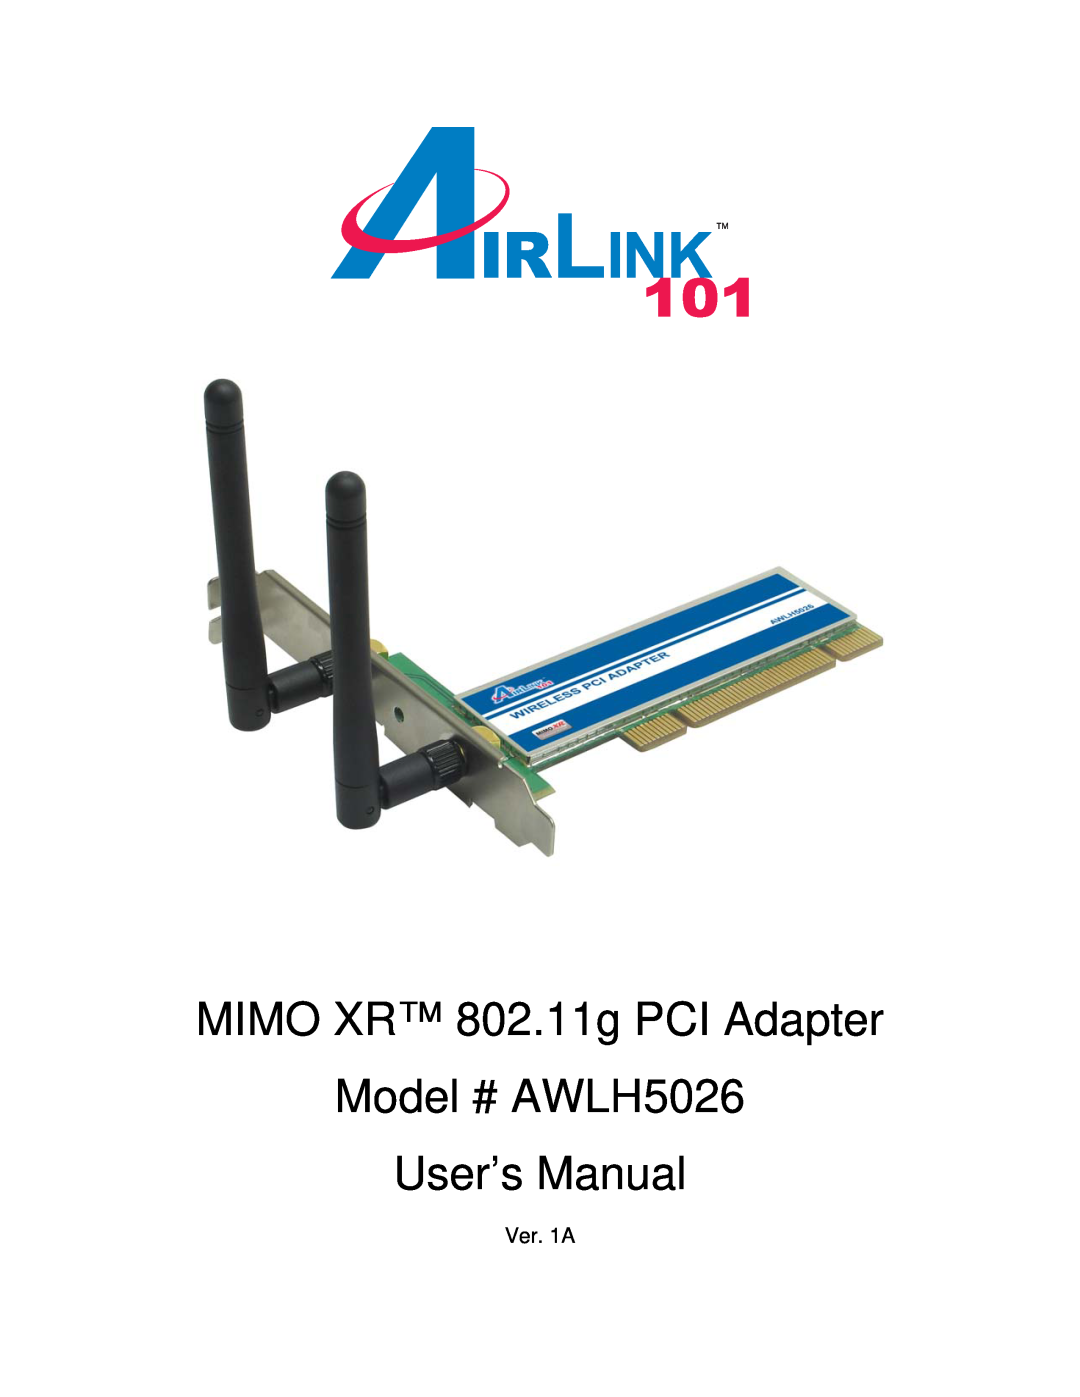 Airlink101 AWLH5026 user manual MIMO XR 802.11g PCI Adapter, Ver. 1A 